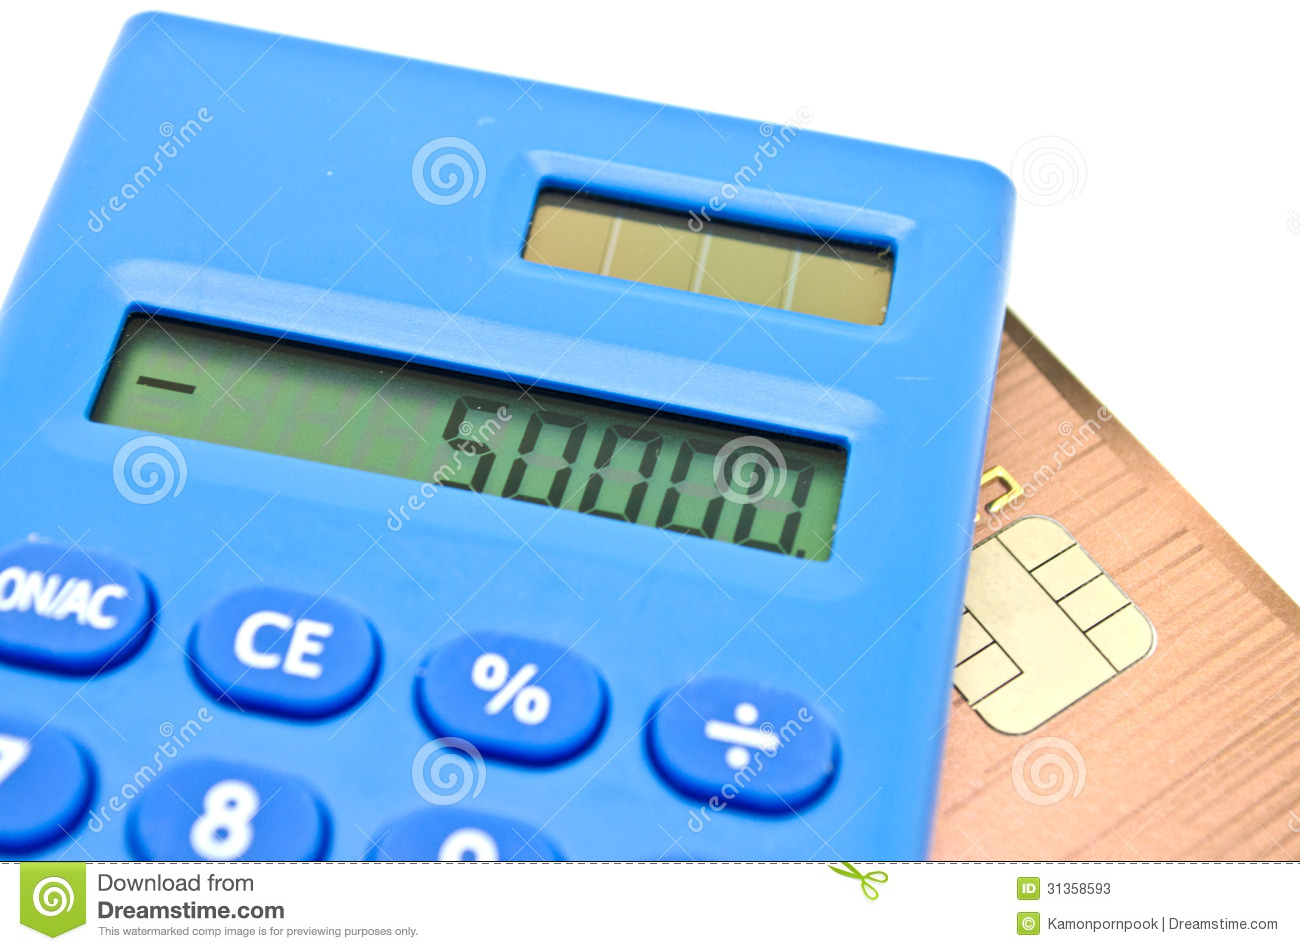 The Amount Shown On Calculator Represented For The Credit Card Debt